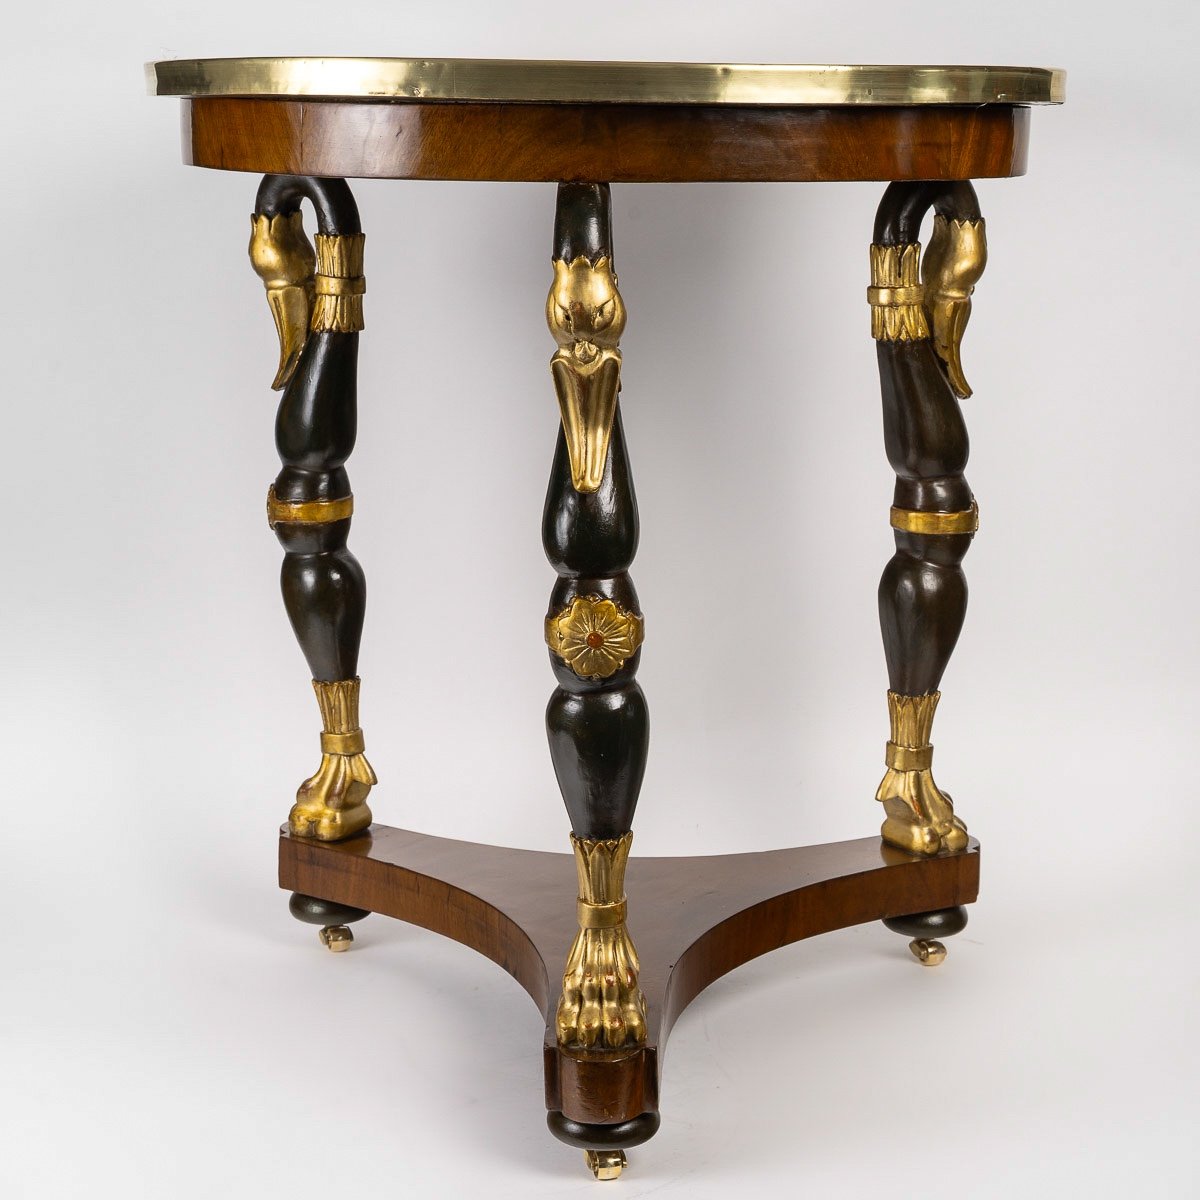 French Restoration Period - Artistic Pedestal Table In Mahogany With Swans Circa 1820-1830